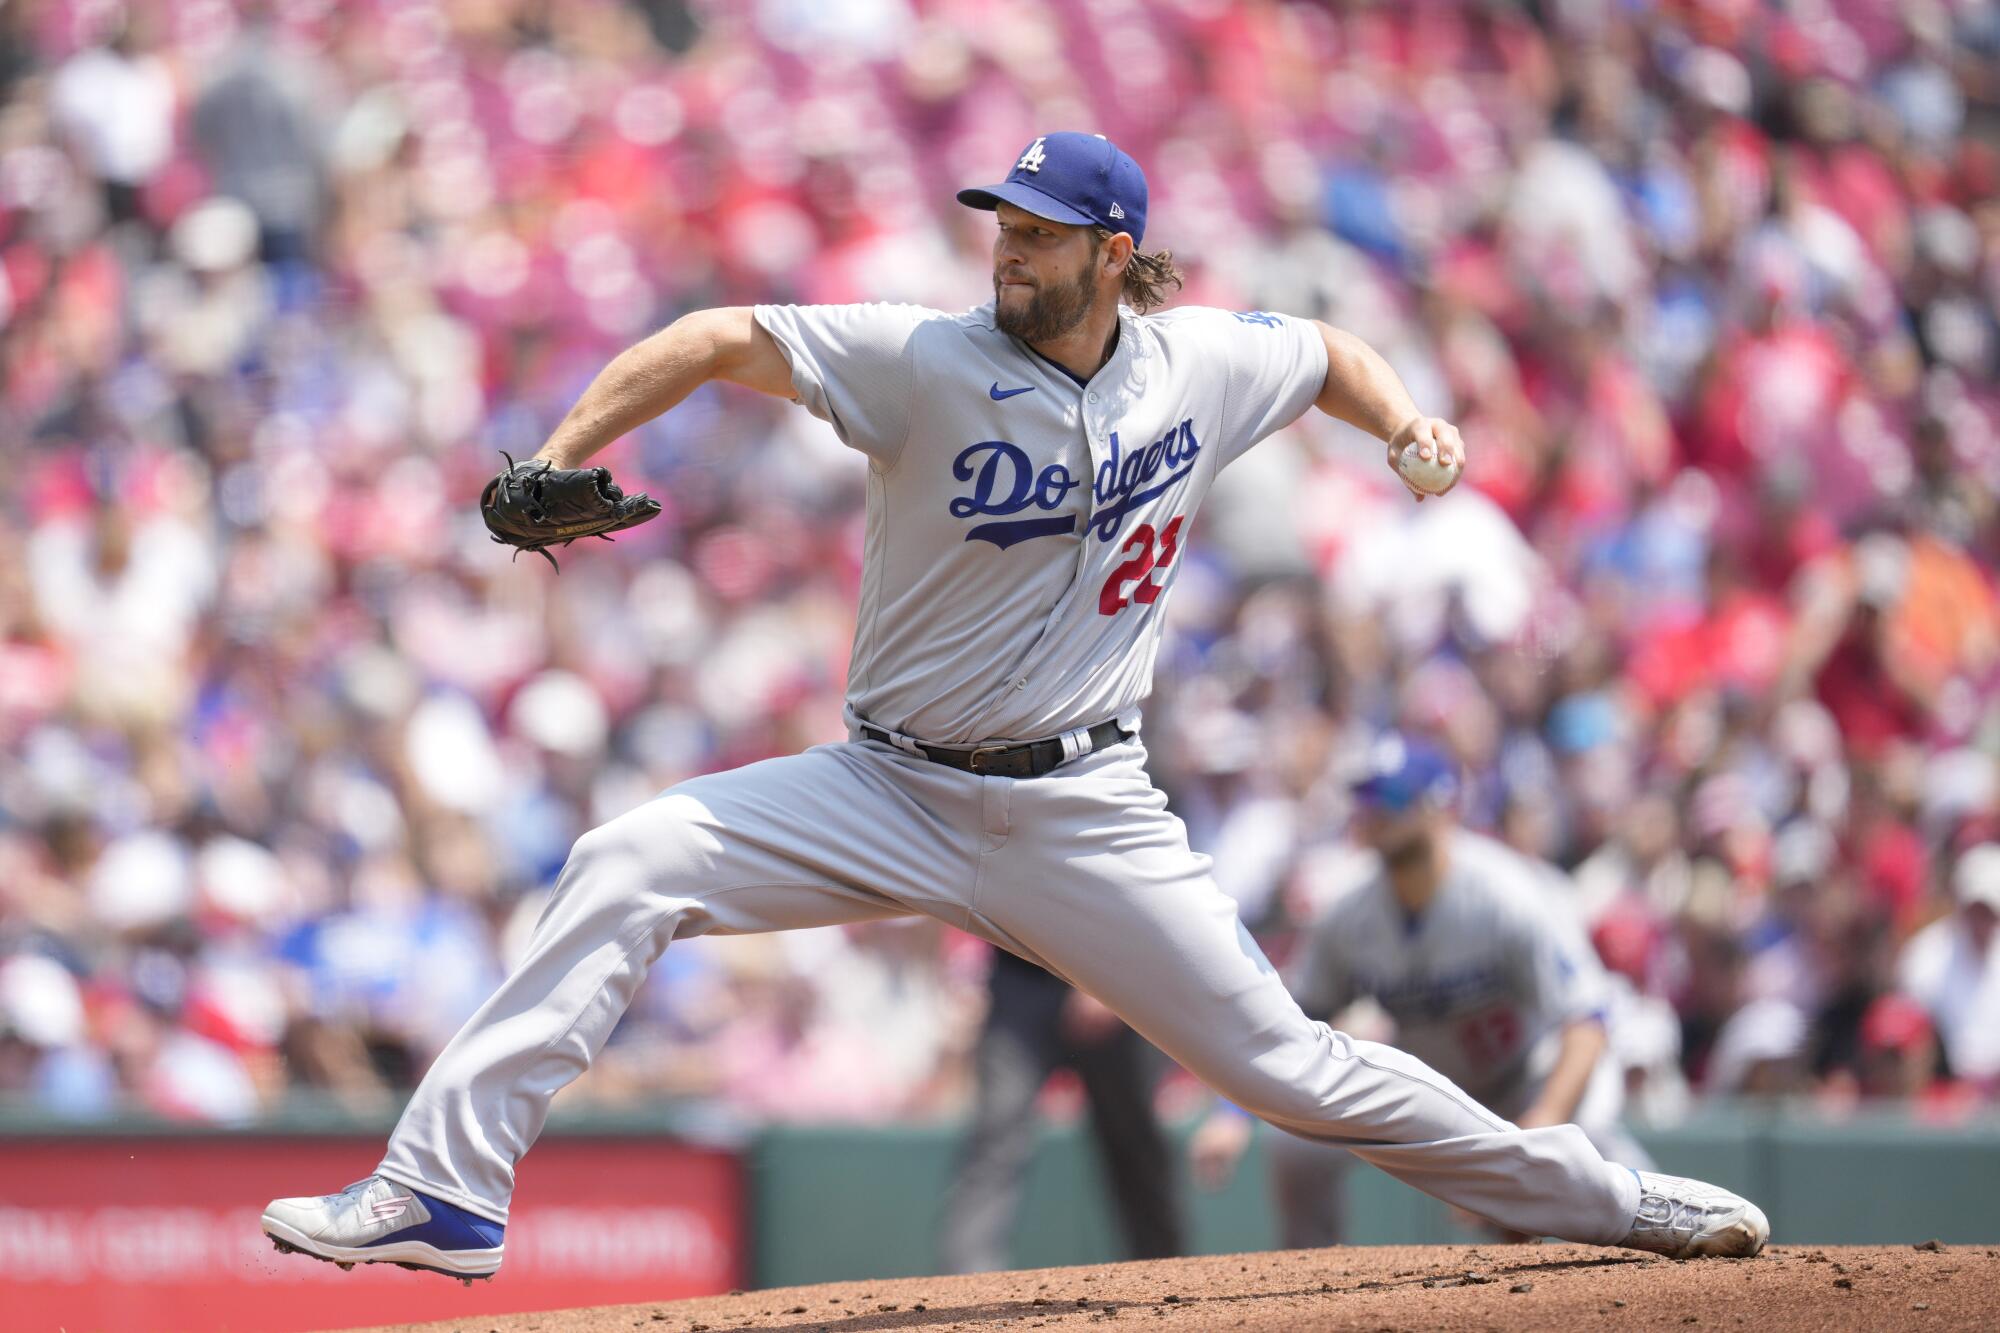 Dodgers starting pitcher Clayton Kershaw delivers during the first inning against the Reds.